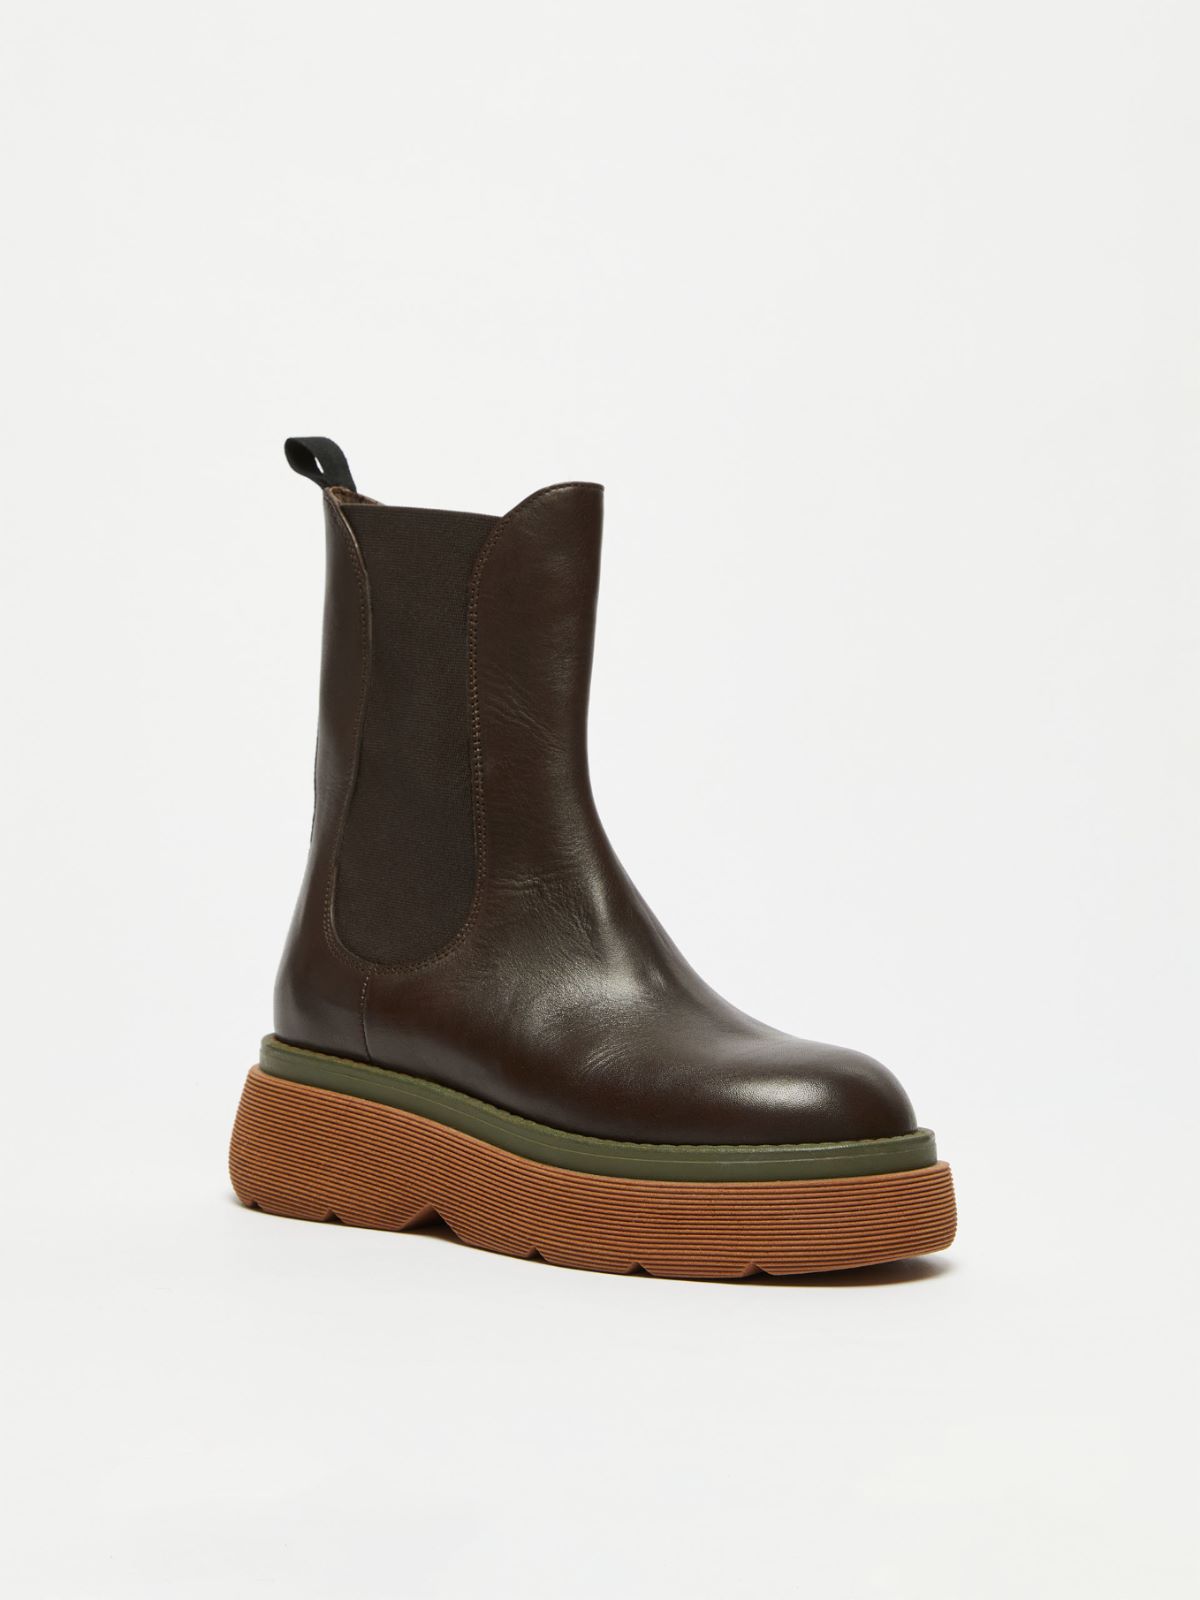 Leather ankle boots, dark bown | Weekend Max Mara